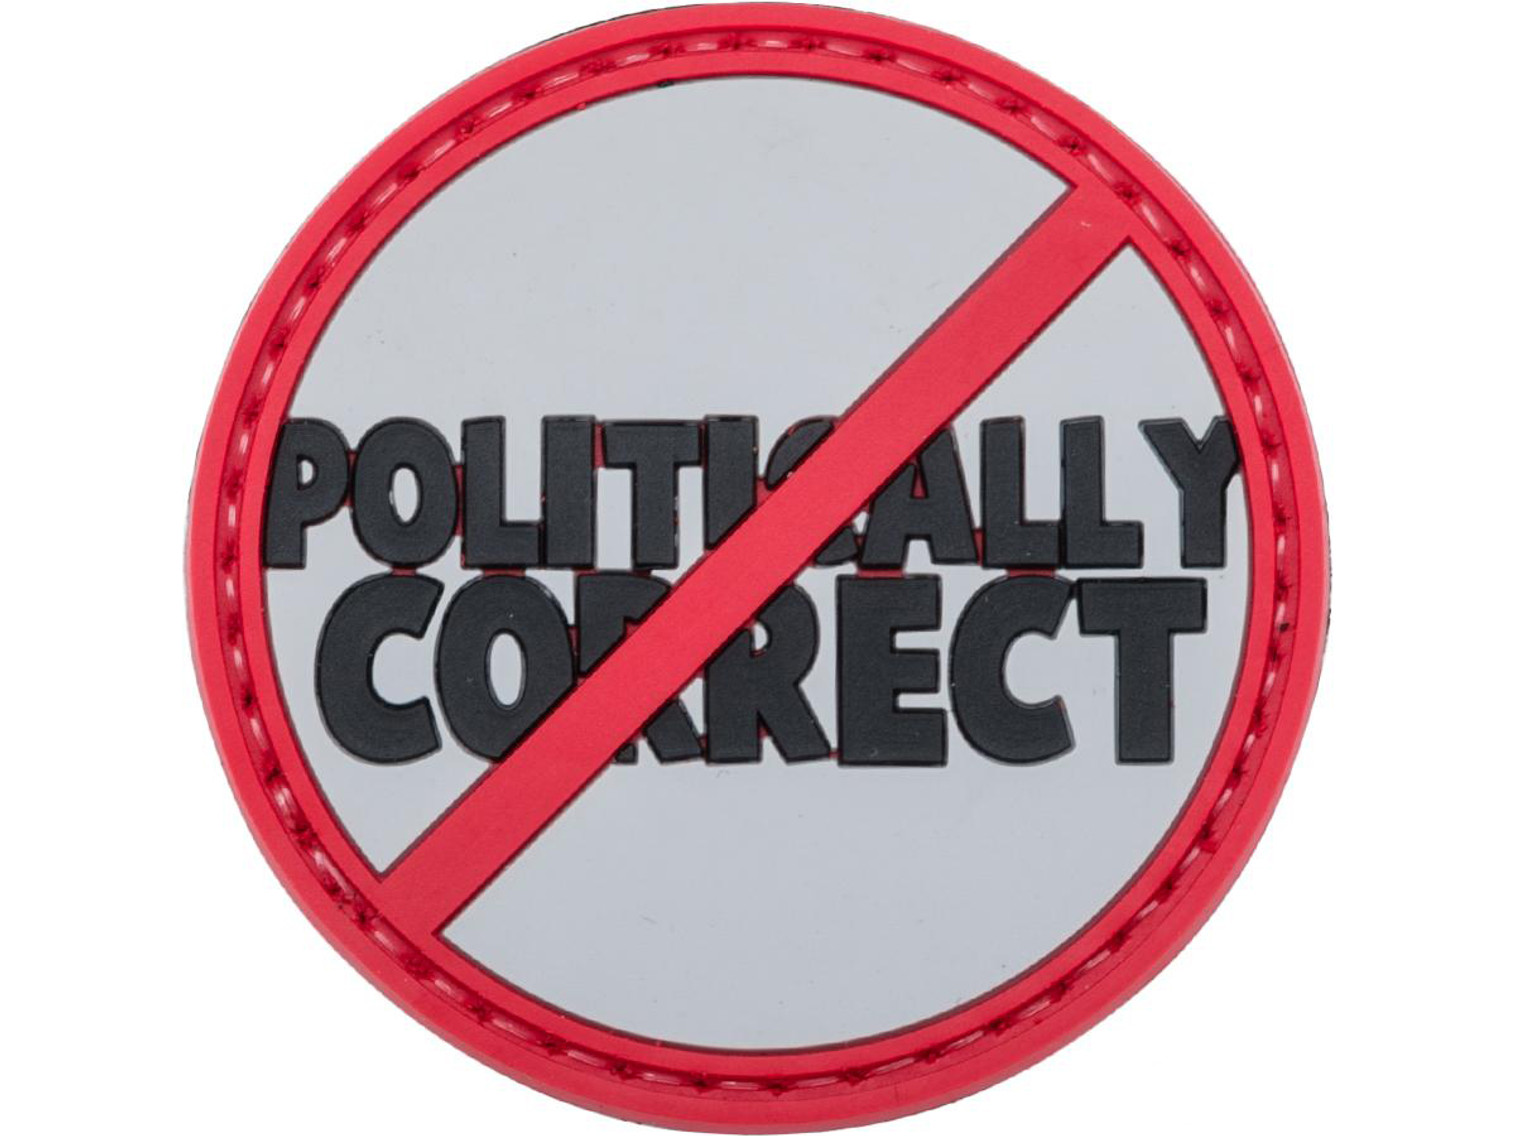 5ive Star Gear "Not Politically Correct" PVC Morale Patch